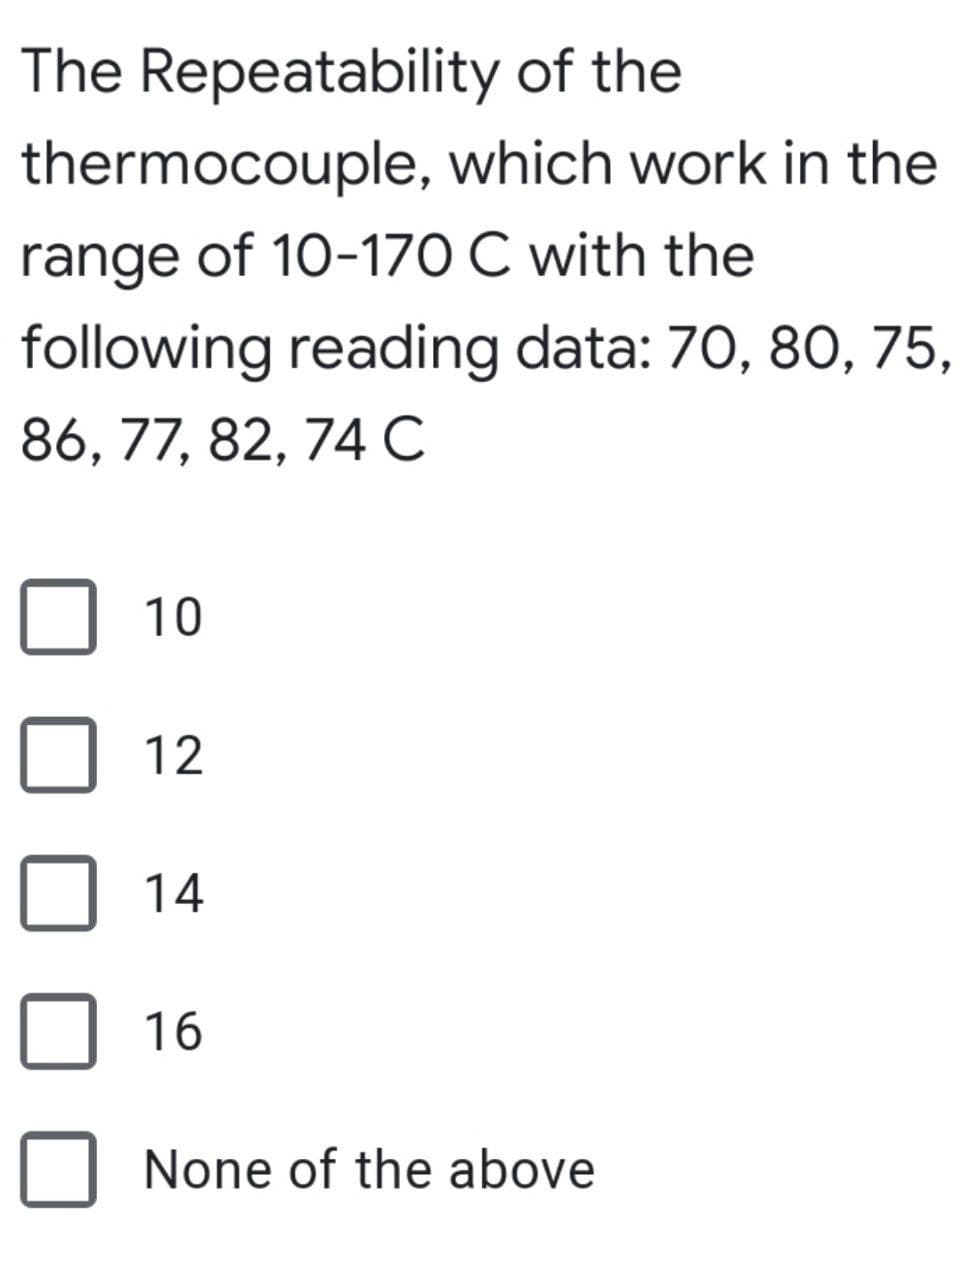 The Repeatability of the
thermocouple, which work in the
range of 10-170 C with the
following reading data: 70, 80, 75,
86, 77, 82, 74 C
10
12
14
16
None of the above
